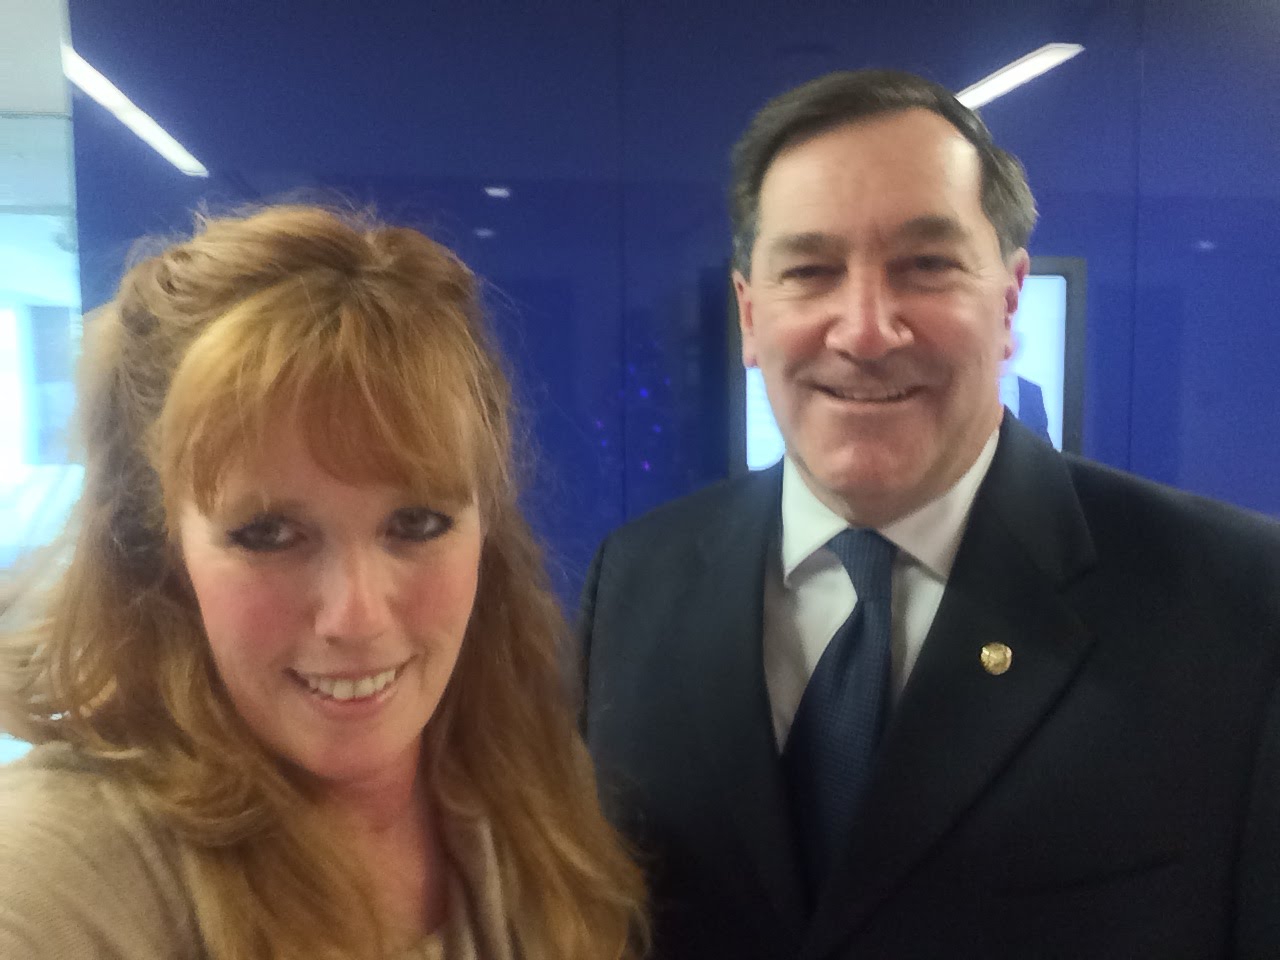 US Senator Joe Donnelly is Making PTSD & Military Suicide a Priority in Congress